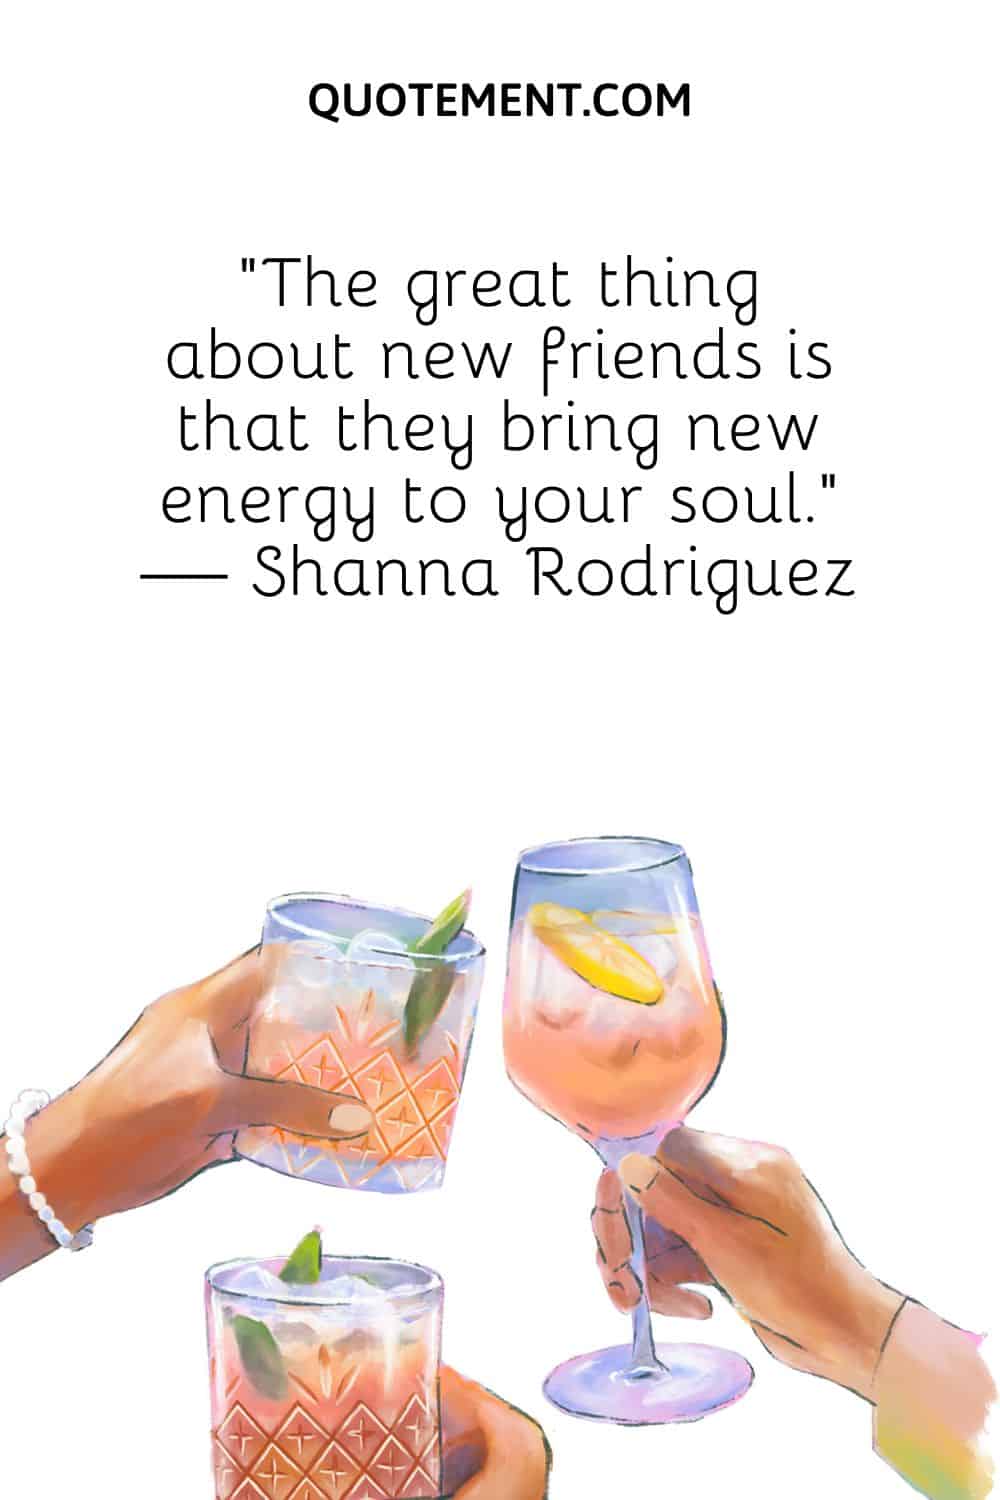 “The great thing about new friends is that they bring new energy to your soul.” — Shanna Rodriguez